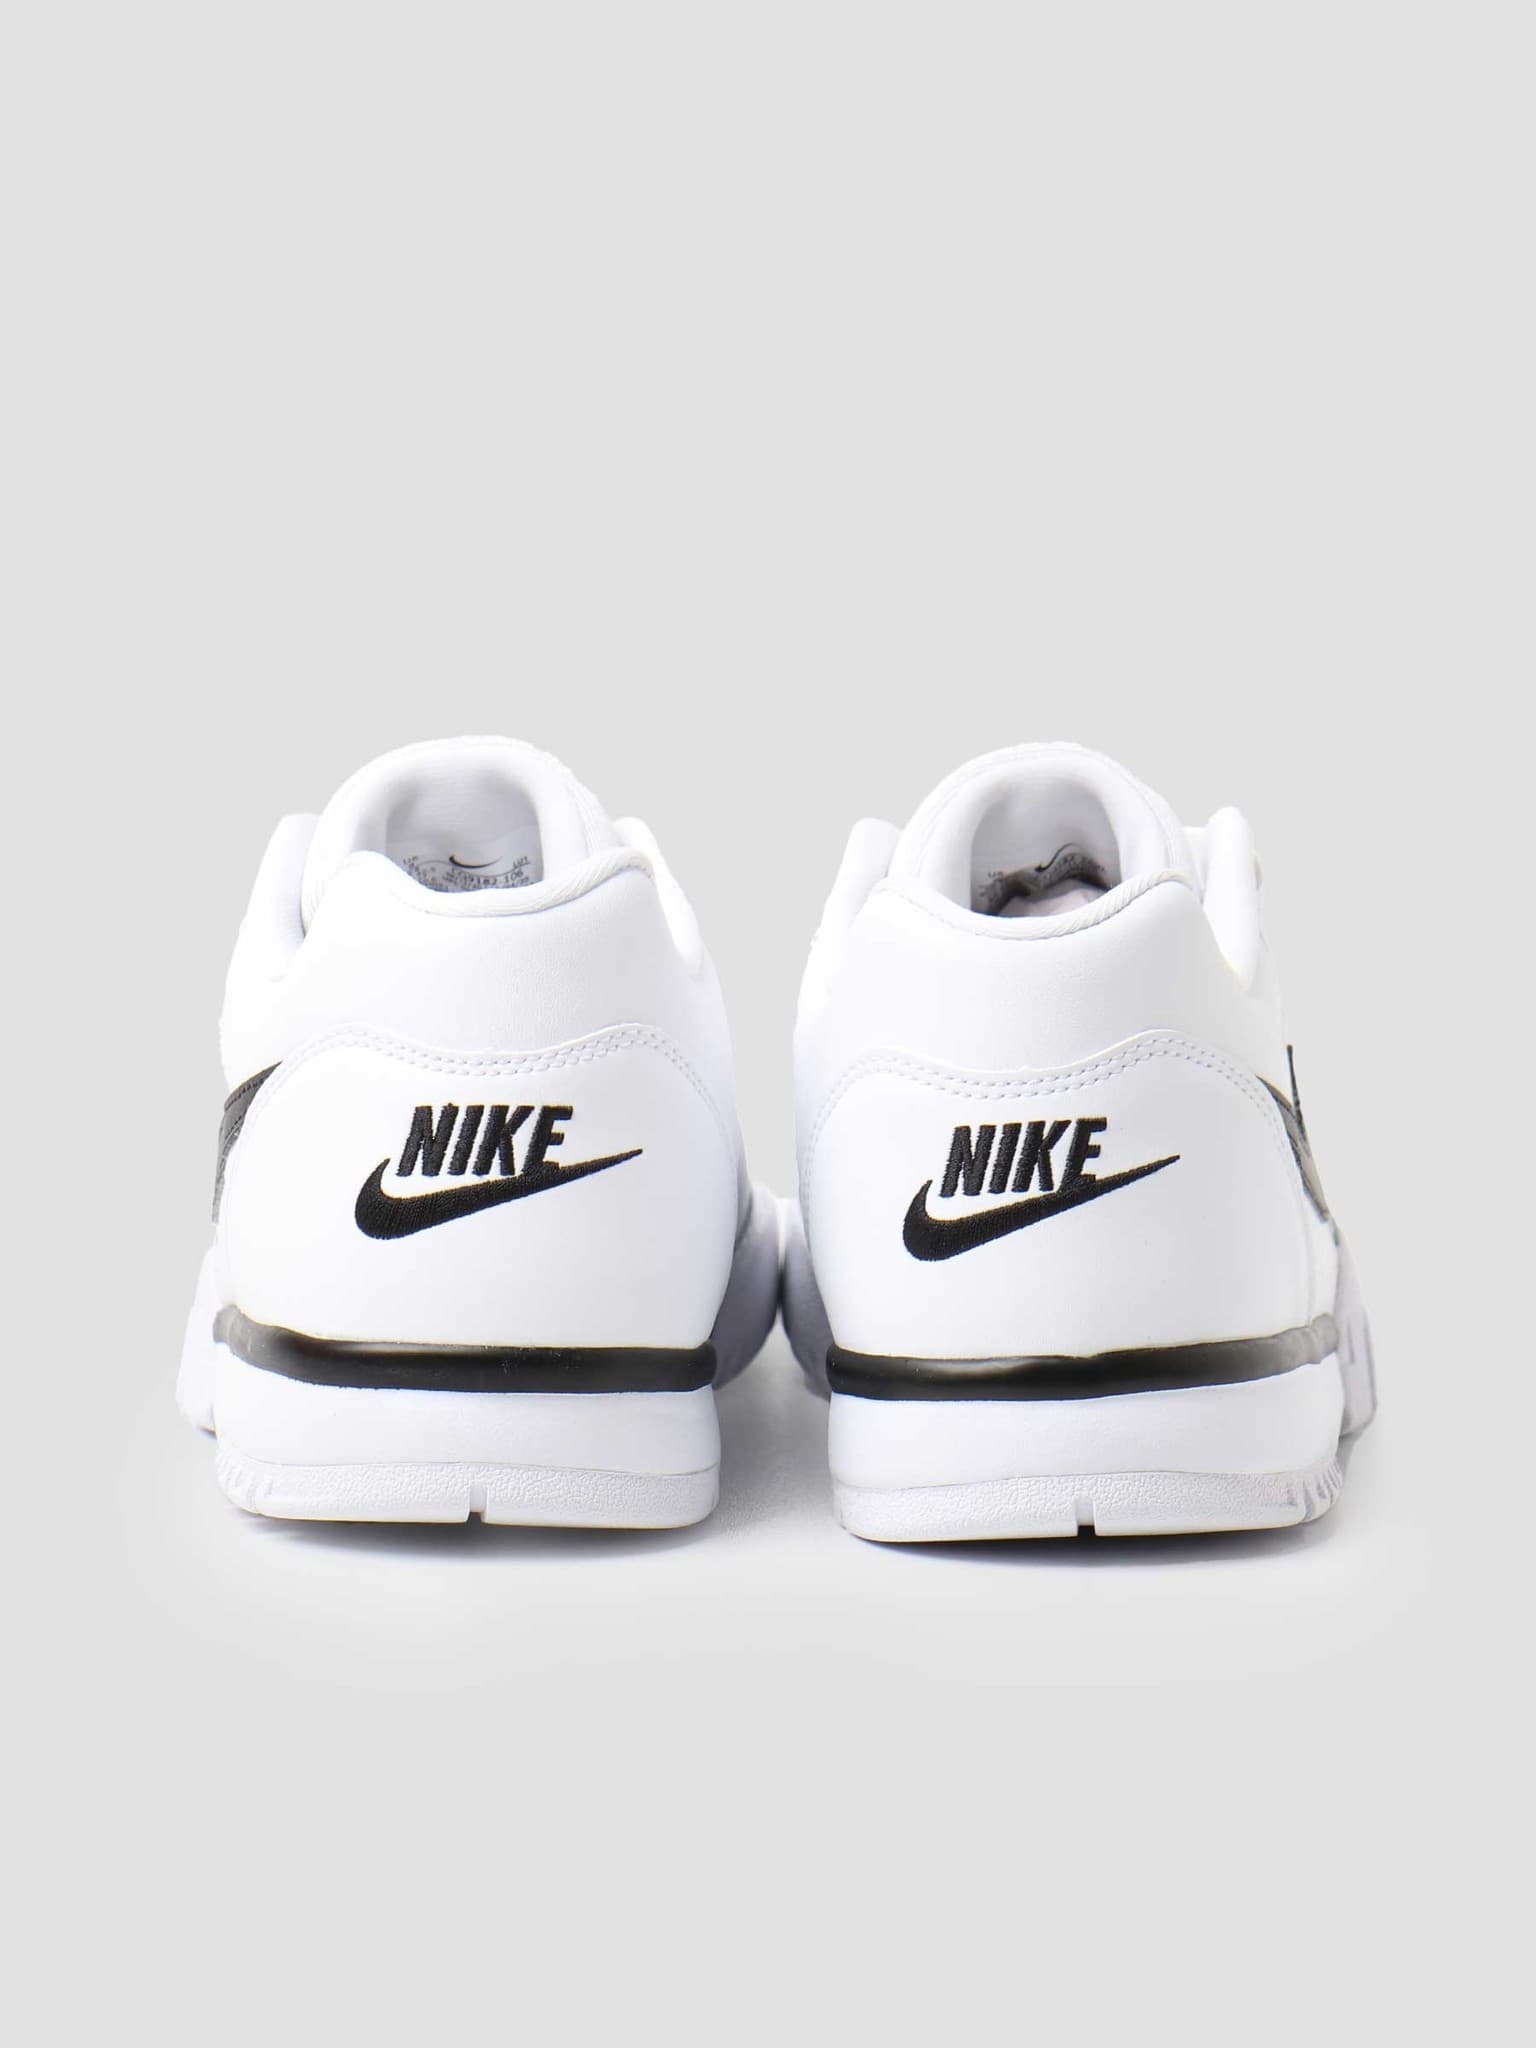 Nike Cross Trainer Low White Black Particle Grey CQ9182-106